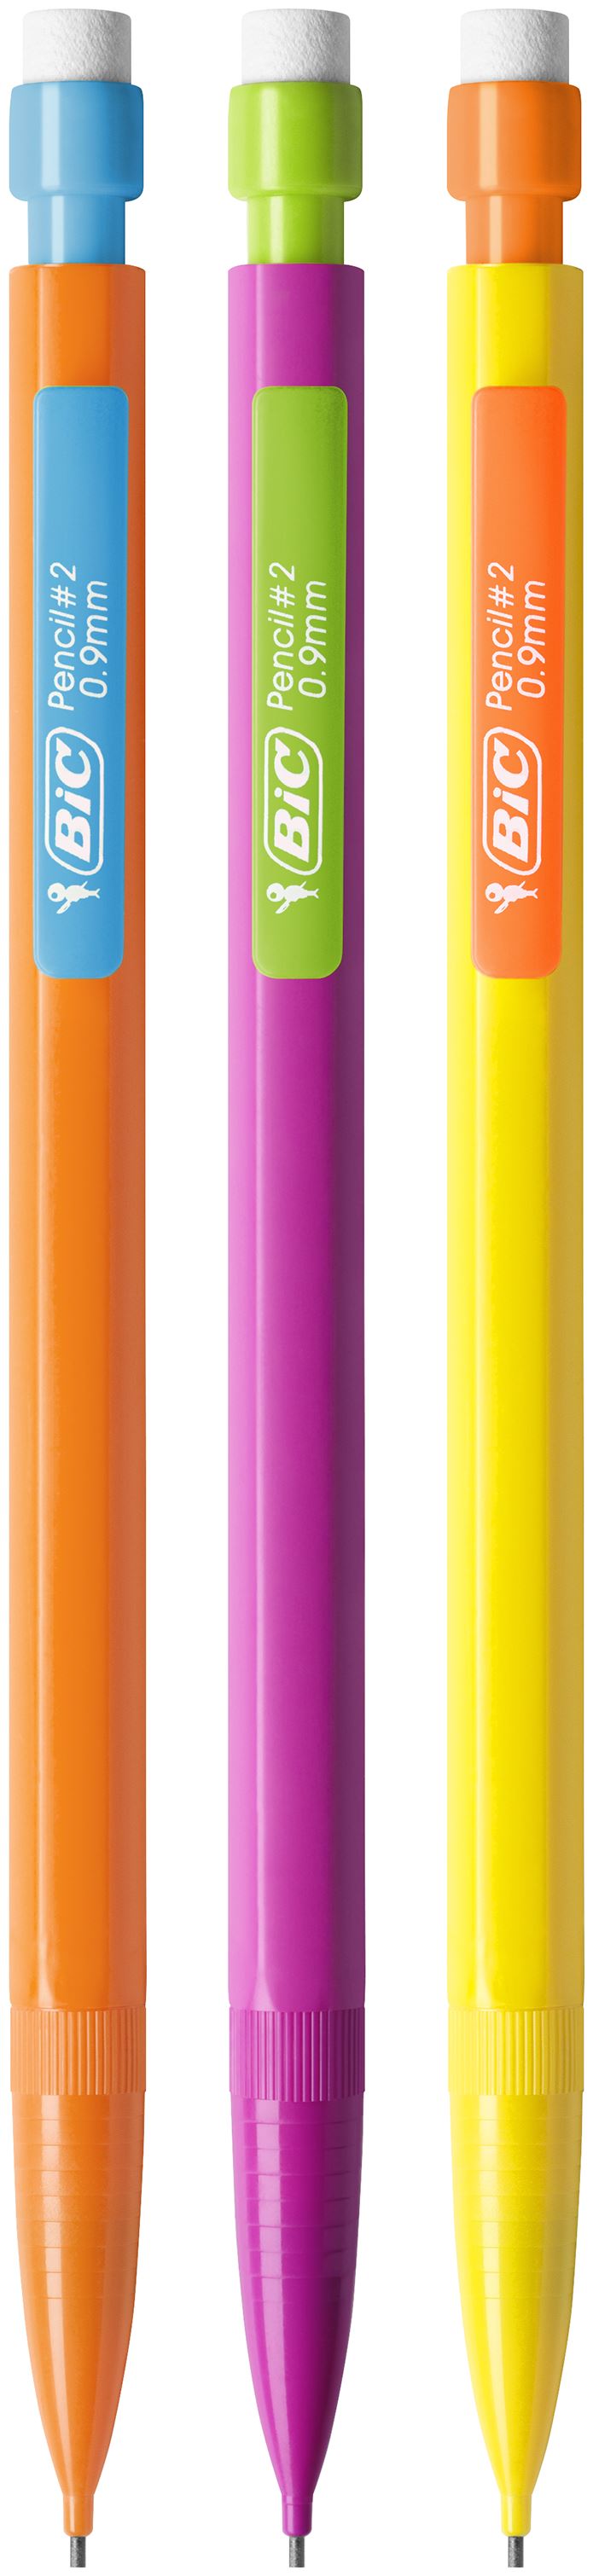 Bic Matic Strong Mechanical Pencil HB 0.9mm Lead Assorted Colour Barrel (Pack 12)